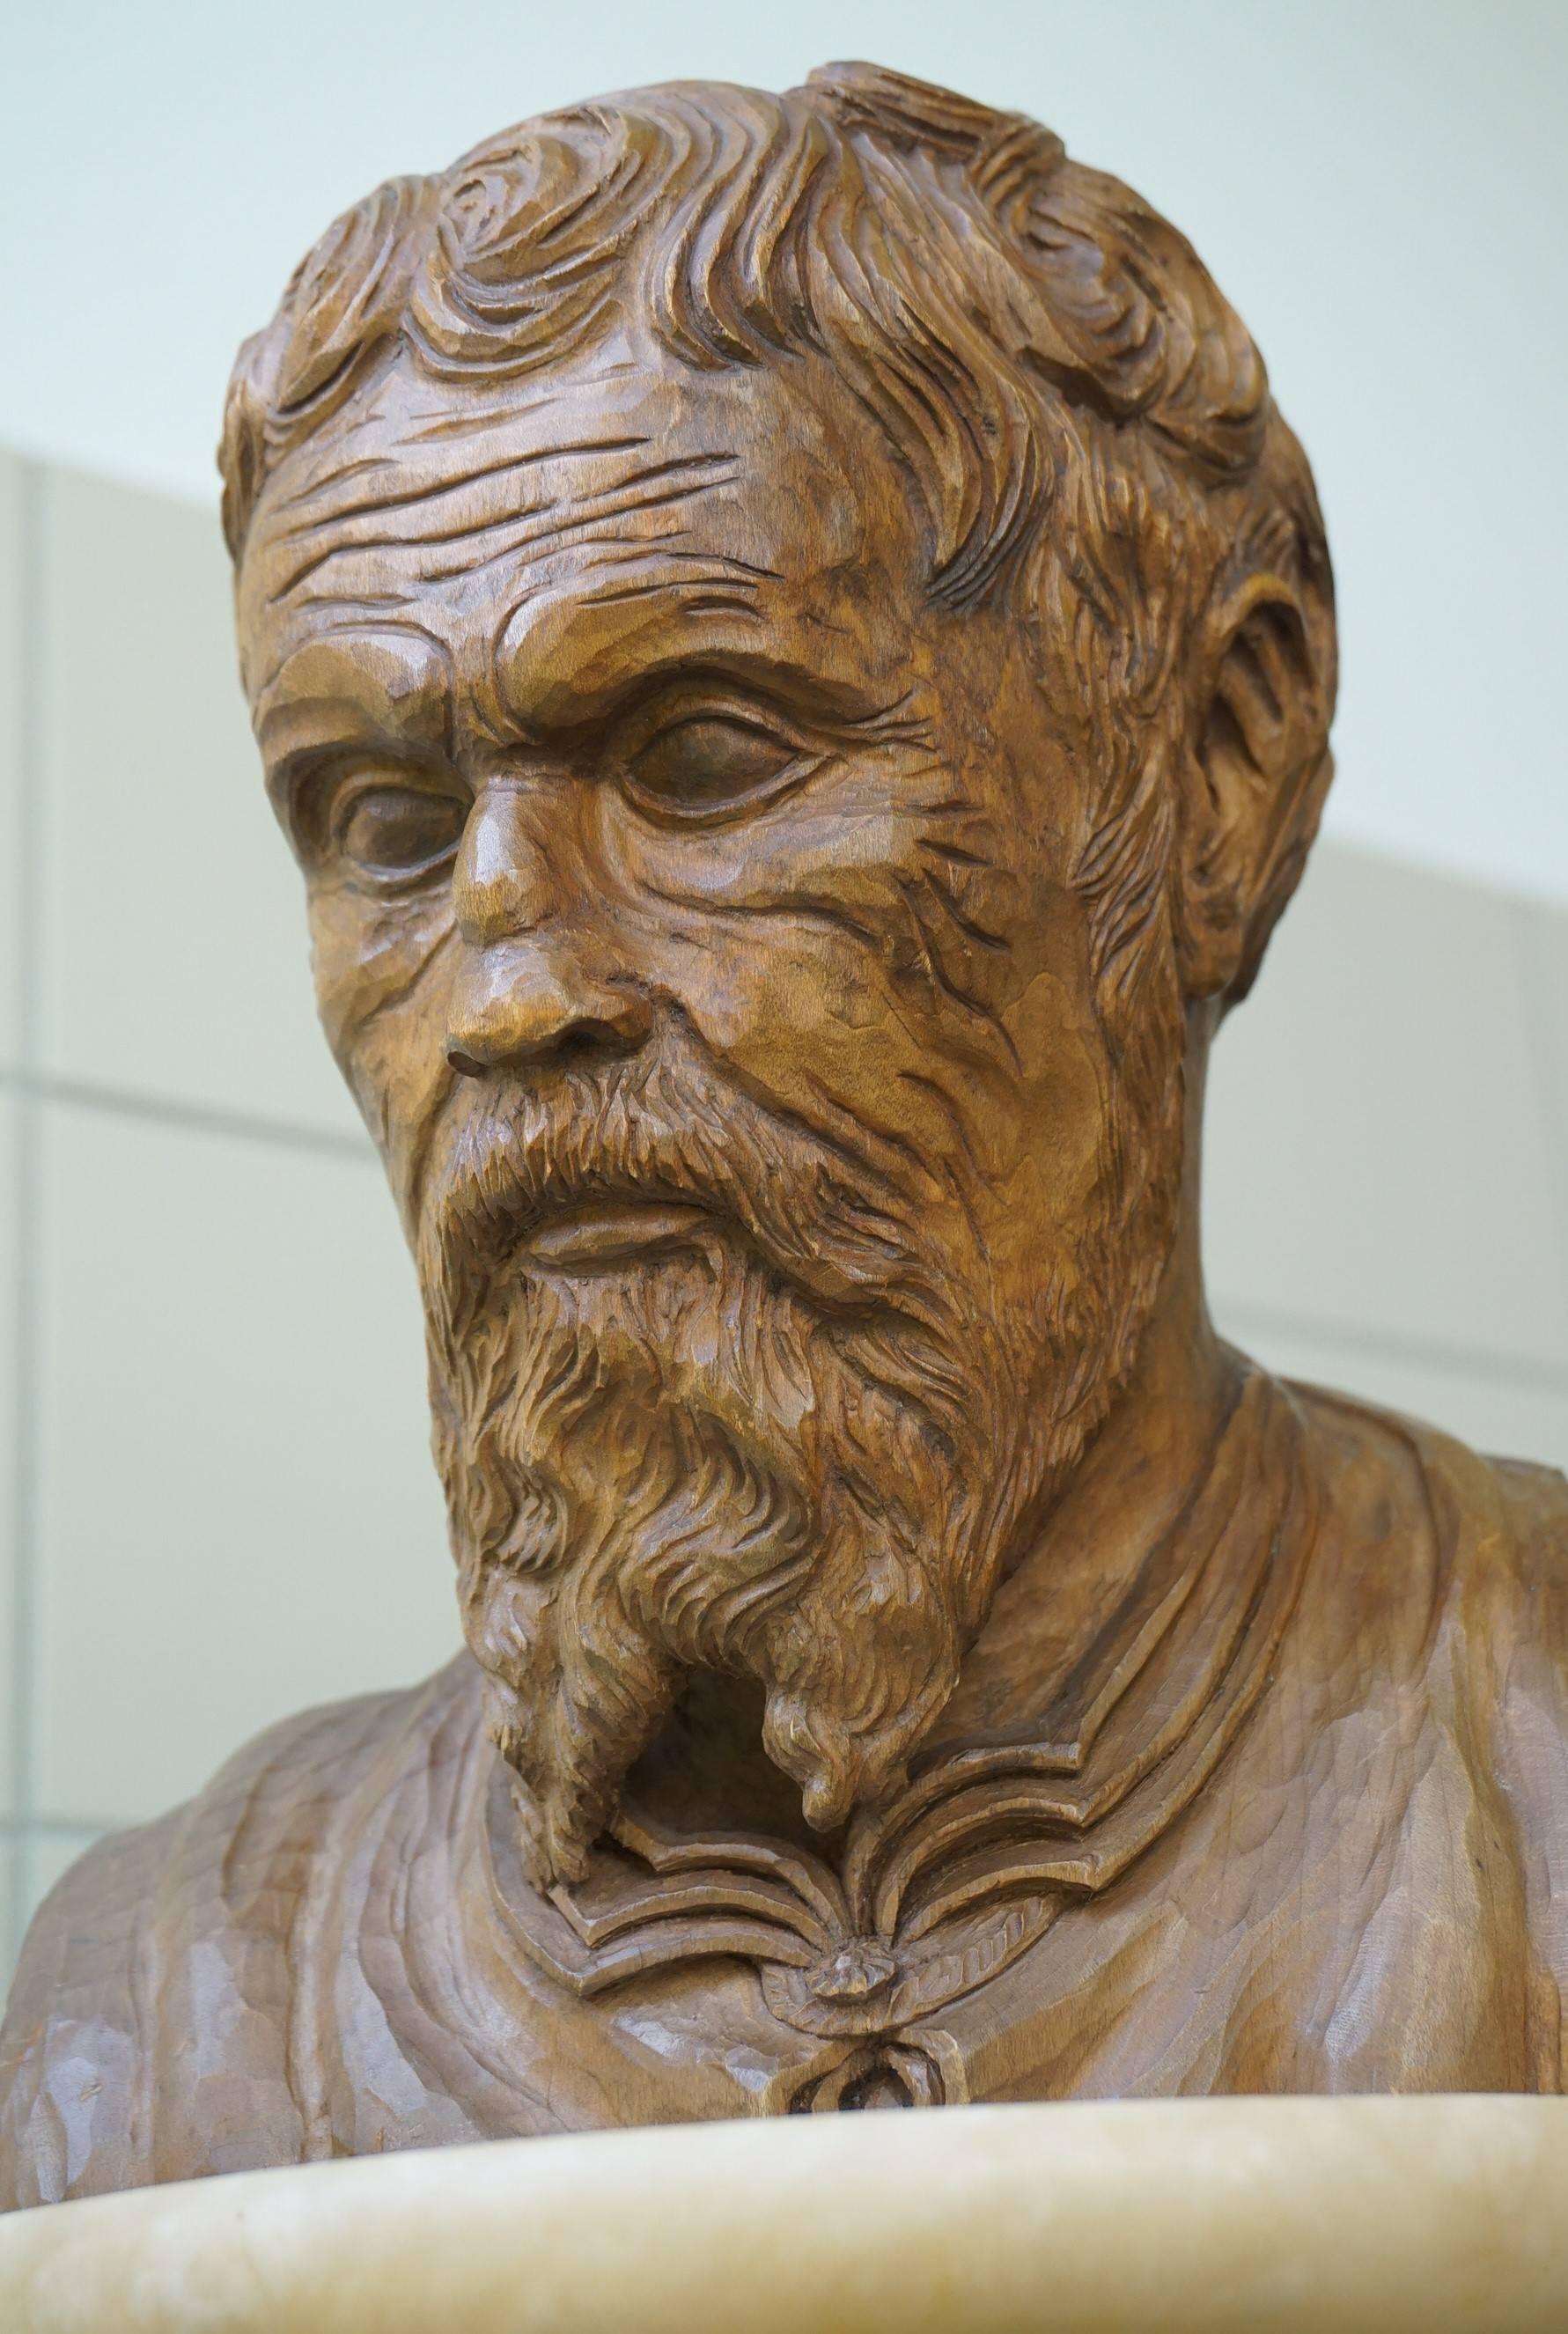 Wood Unique Hand-Carved Sculpture/Bust of Michelangelo Buonarroti by Walther Kieser